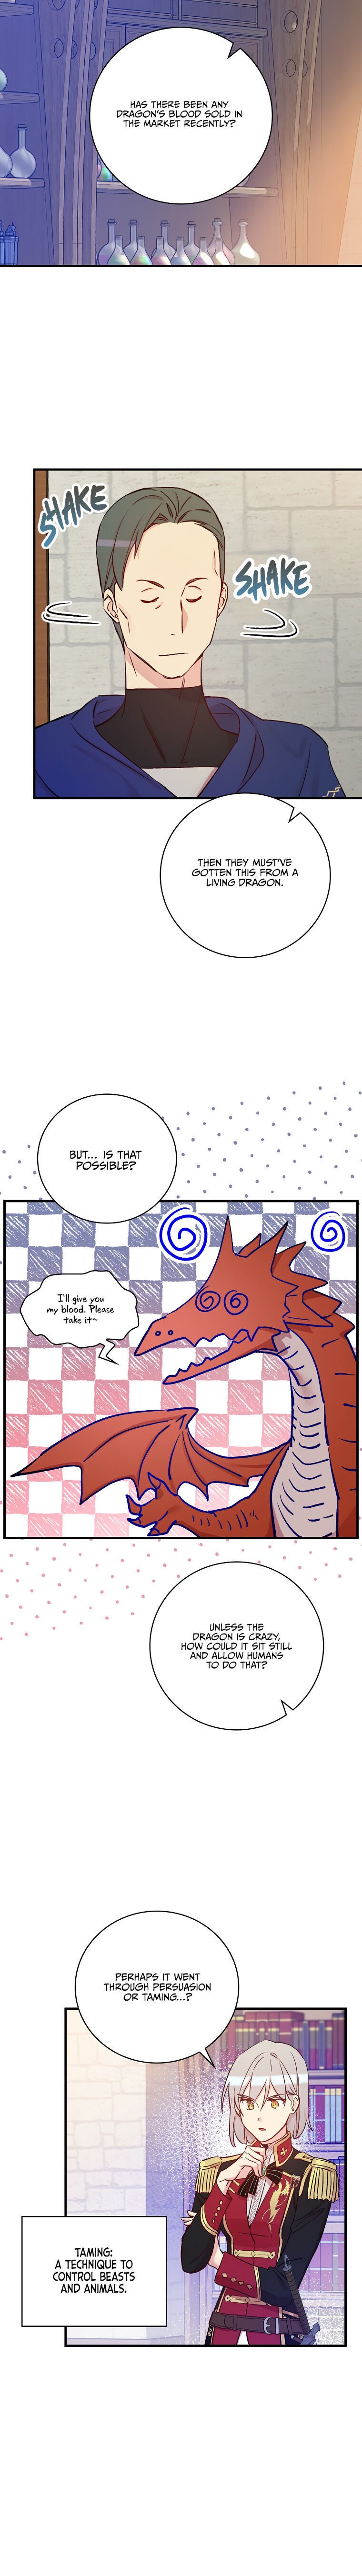 a-red-knight-does-not-blindly-follow-money-chap-39-23